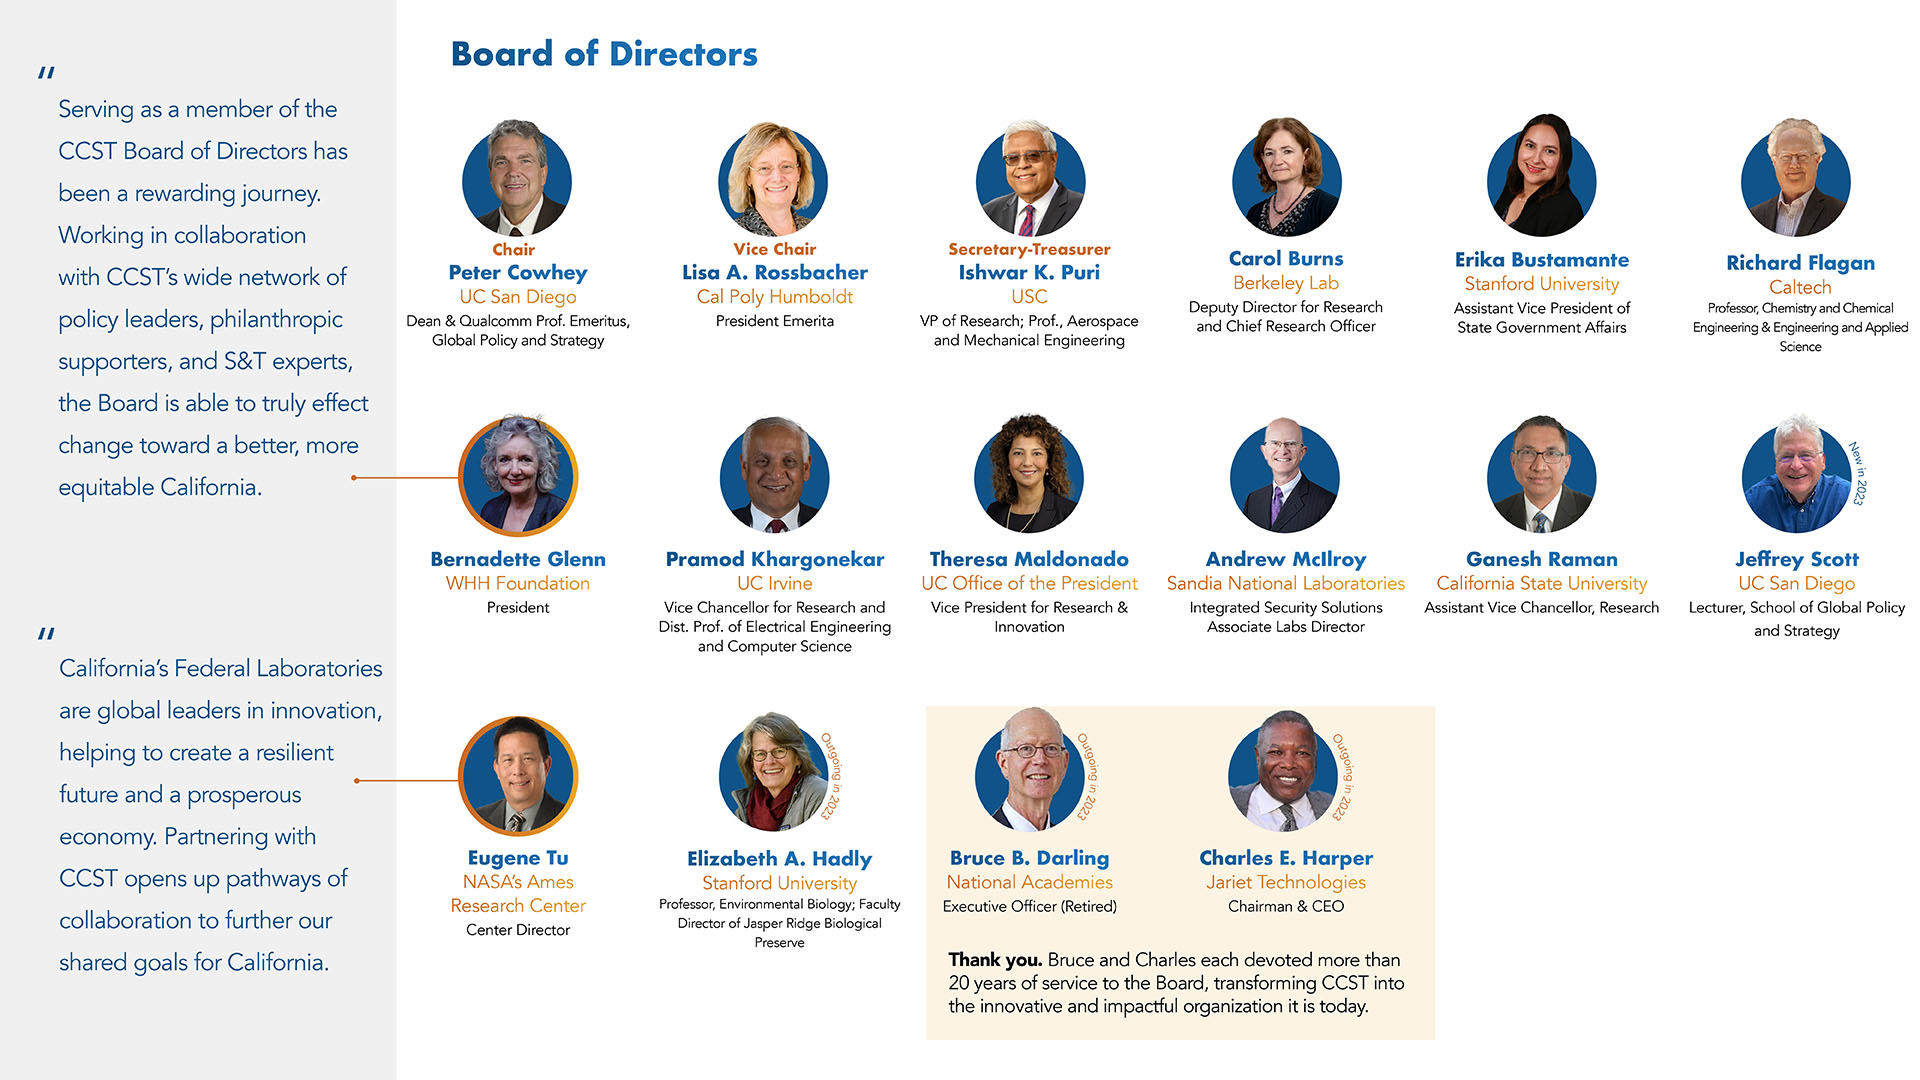 A roster of the Board of Directors with circular cropped headshots, names, institutions, and titles as well as two quotes from Bernadette Glenn and Eugene Tu, and a highlight calling out outgoing members Bruce Darling and Charles Harper for their 20+ years of service. Bernadette Glenn: "Serving as a member of the CCST Board of Directors has been a rewarding journey. Working in collaboration with CCST’s wide network of policy leaders, philanthropic supporters, and S&T experts, the Board is able to truly effect change toward a better, more equitable California." Eugene Tu: "California’s Federal Laboratories are global leaders in innovation, helping to create a resilient future and a prosperous economy. Partnering with CCST opens up pathways of collaboration to further our shared goals for California."